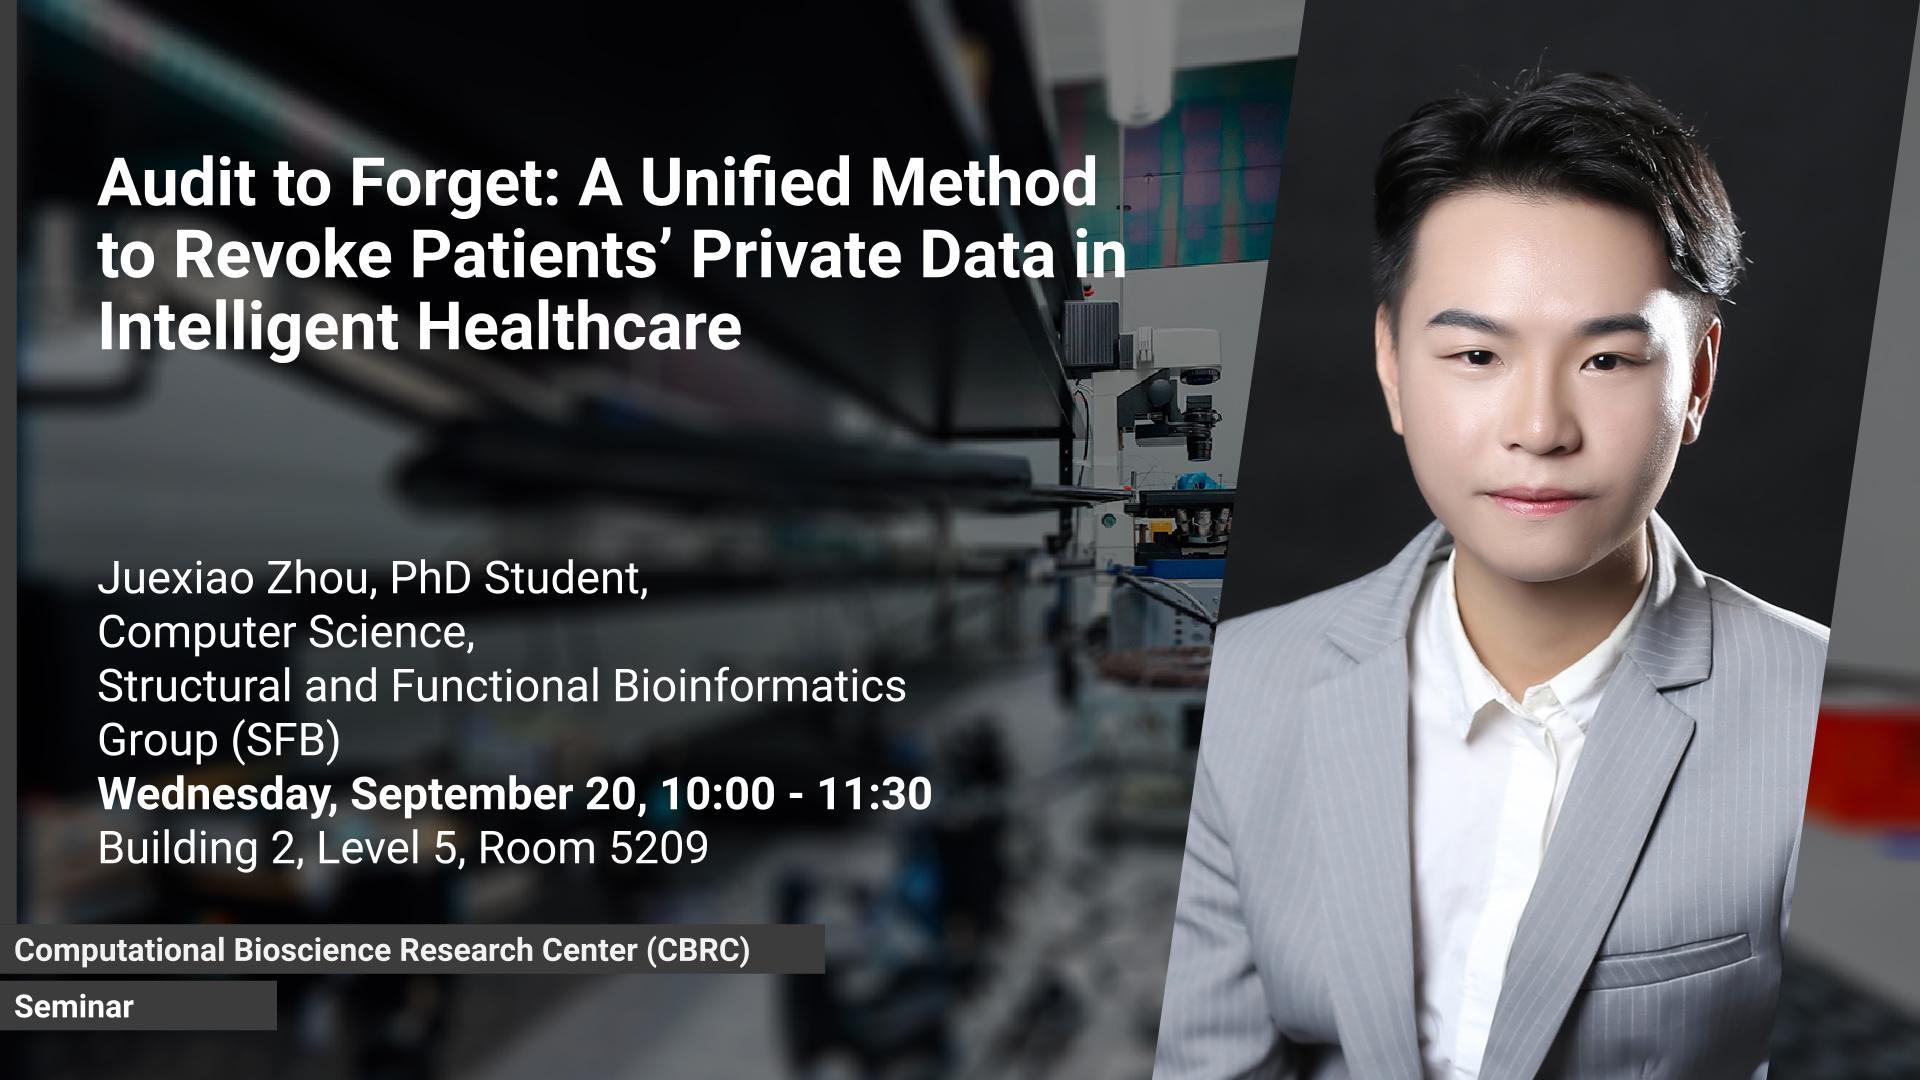 CBRC Seminar: Audit to Forget: A Unified Method to Revoke Patients’ Private Data in Intelligent Healthcare by Juexiao Zhou